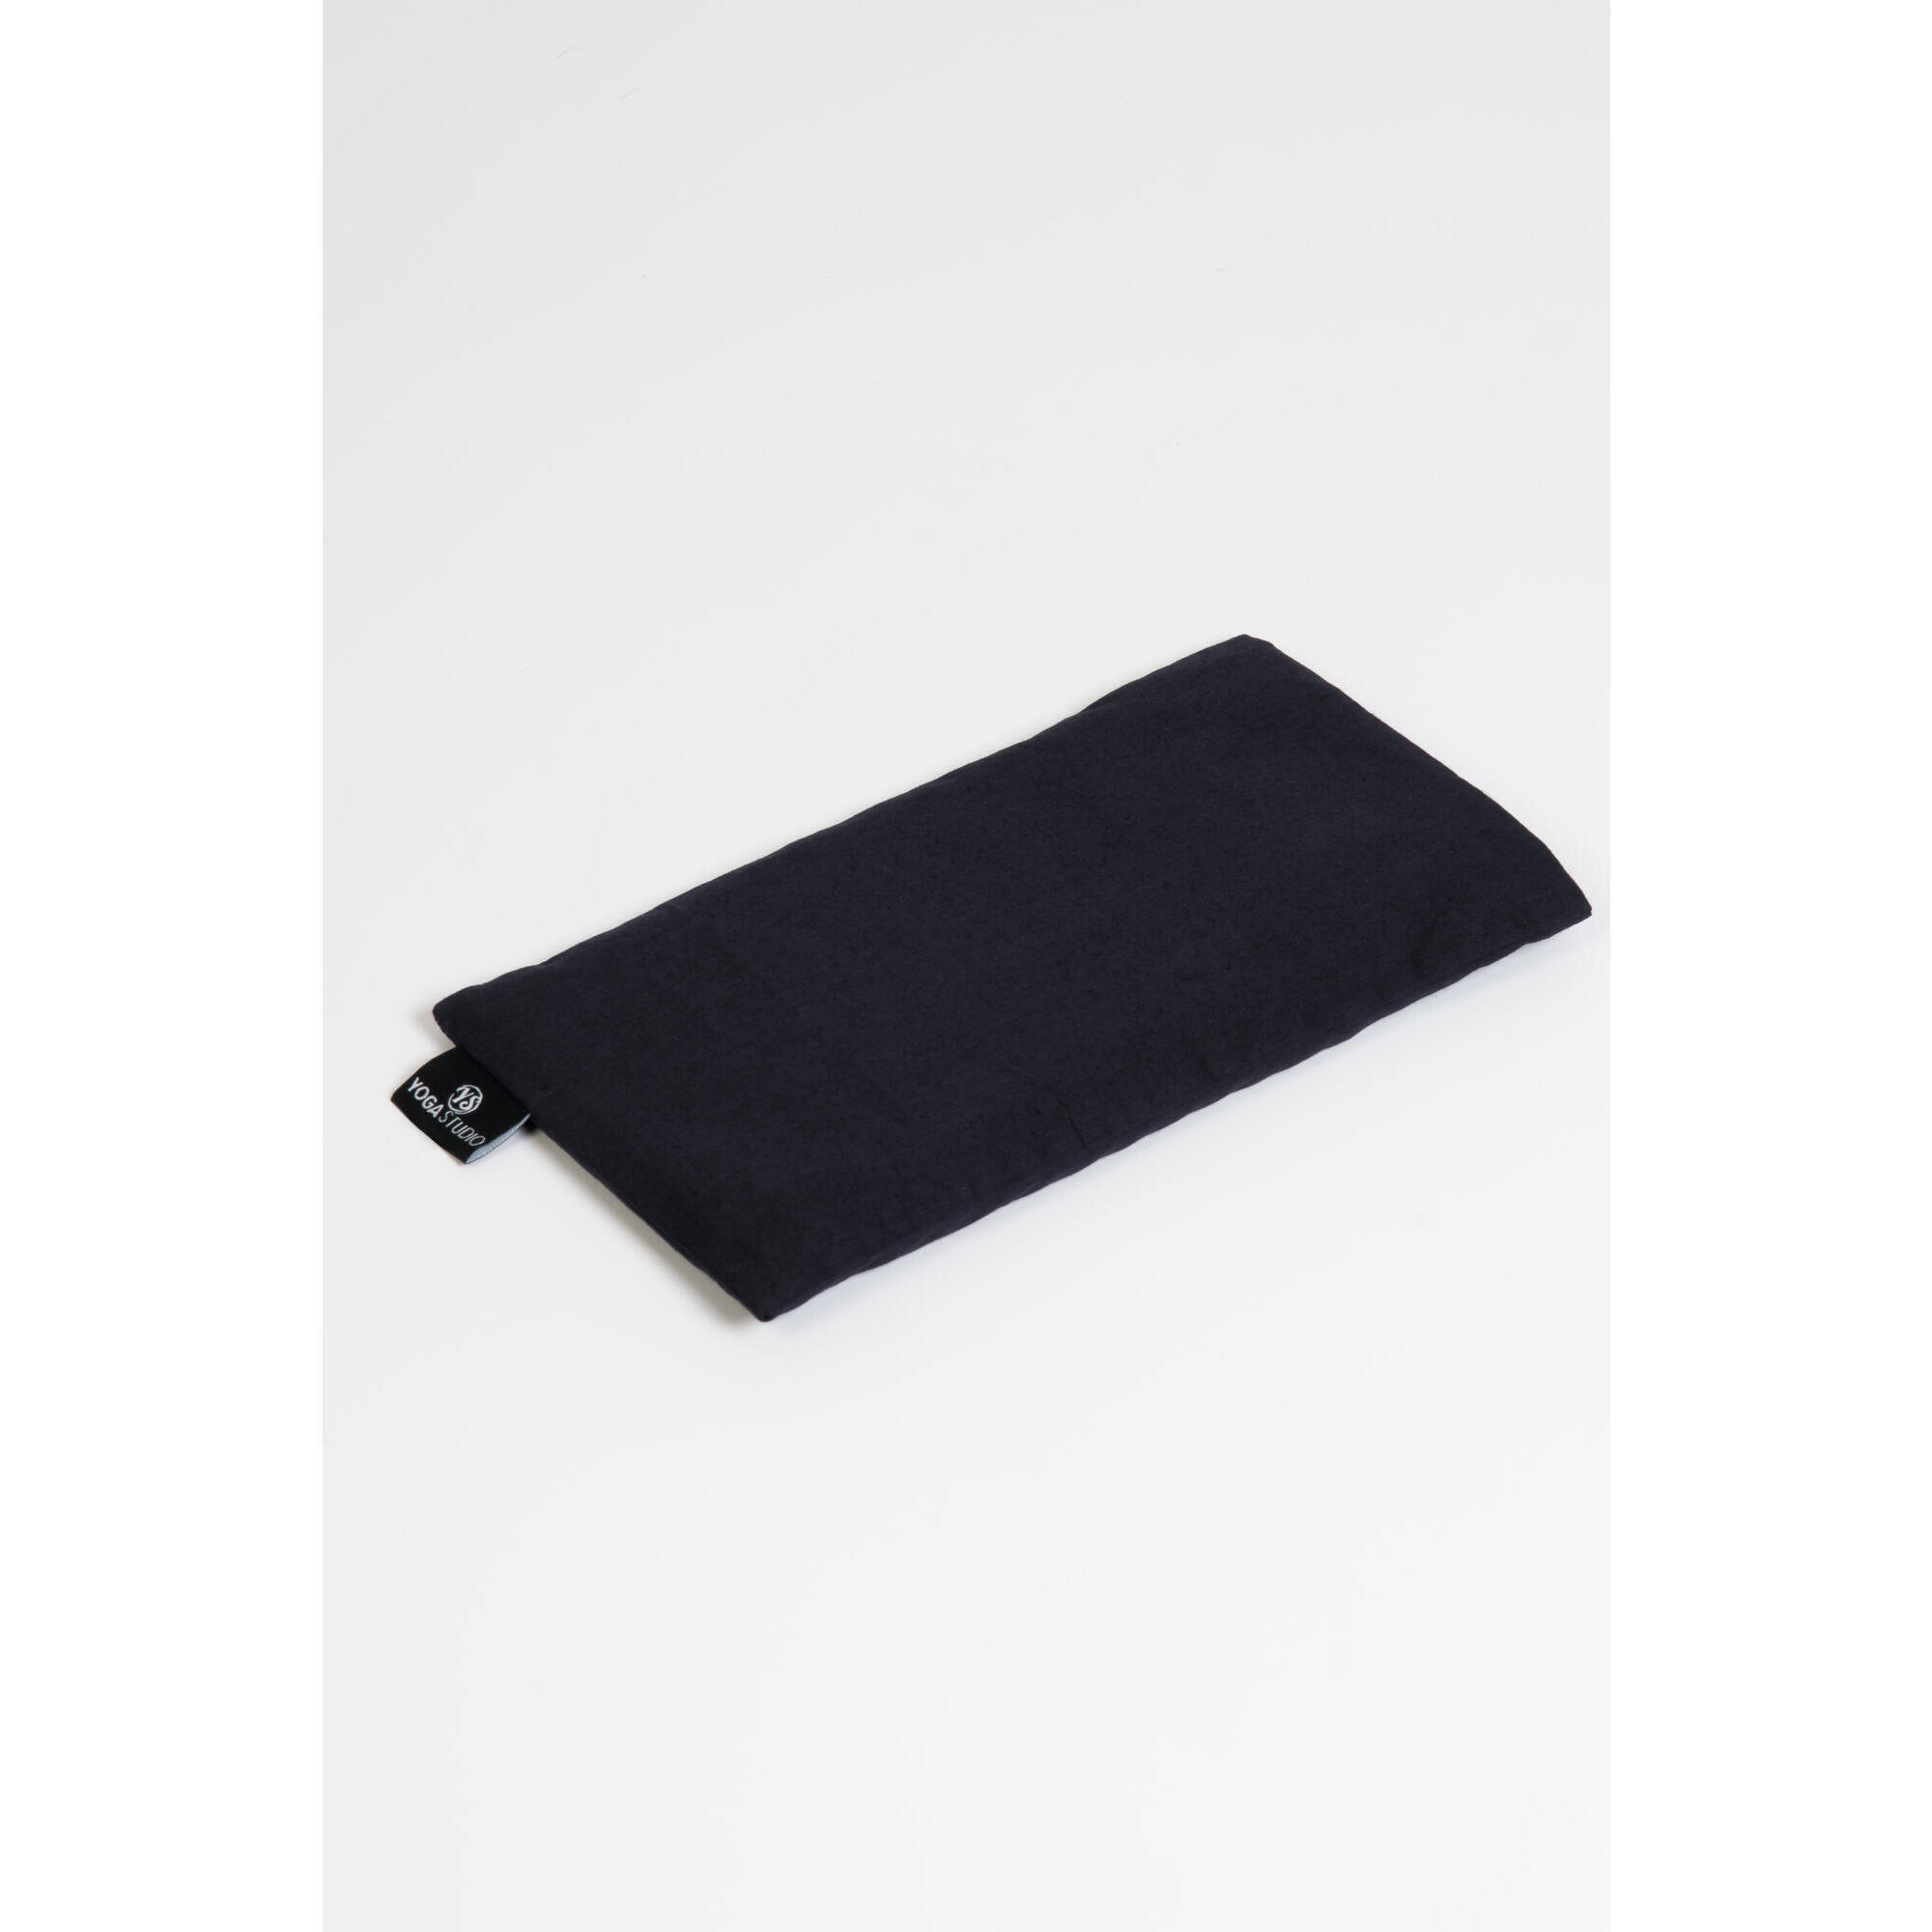 Yoga Studio Scented Lavender & Linseed Eye Pillows - Black 1/2